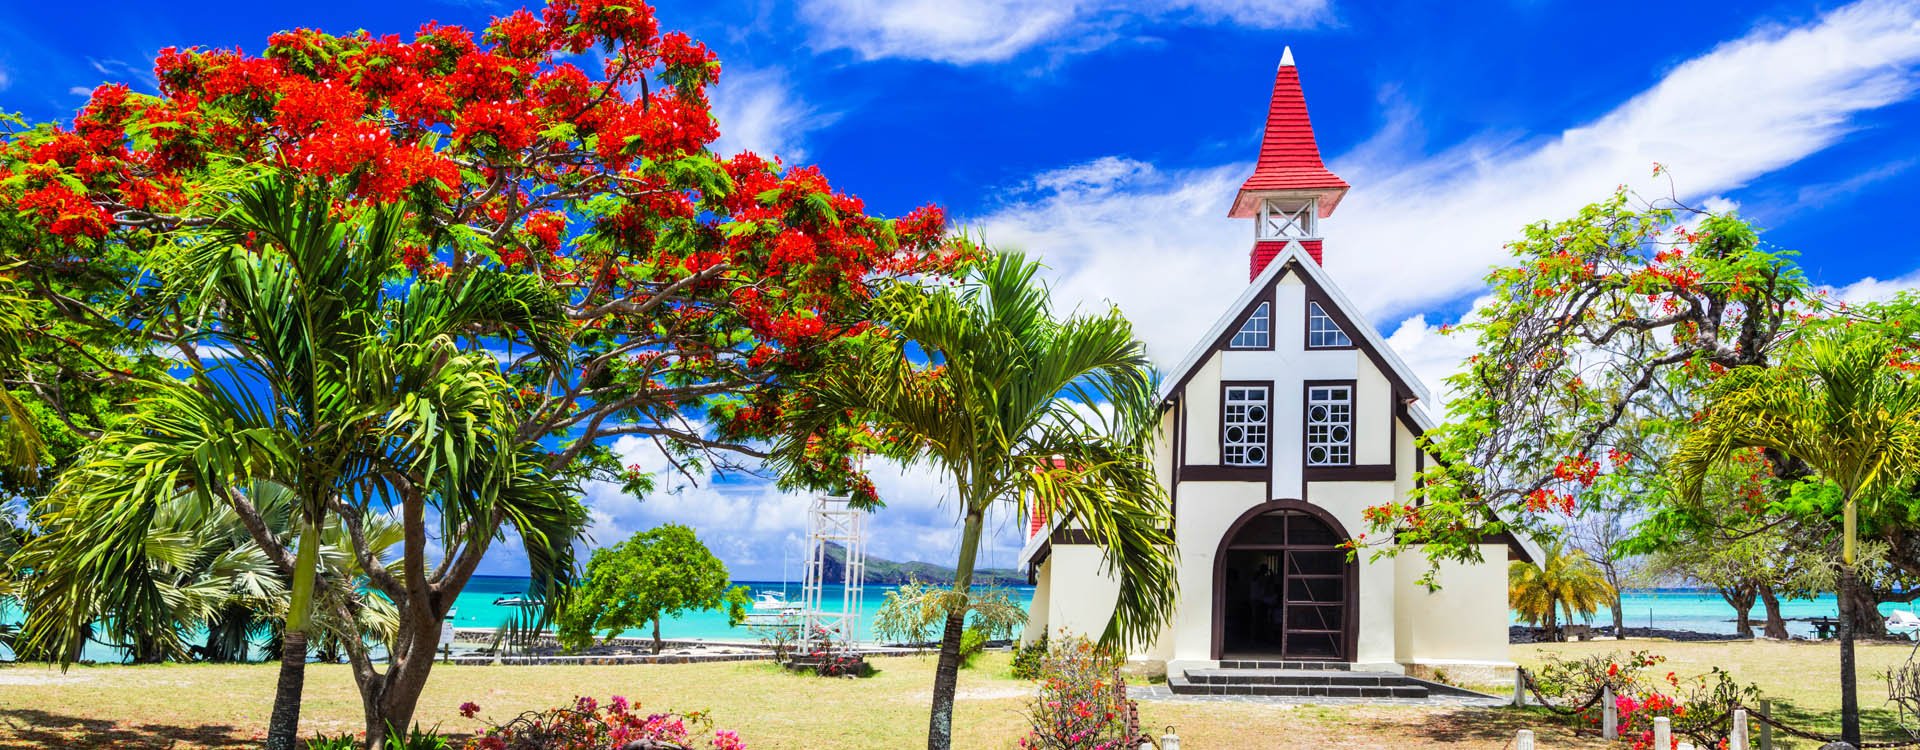 Mauritius island - Red church on the beach with blooming flamboyant tree